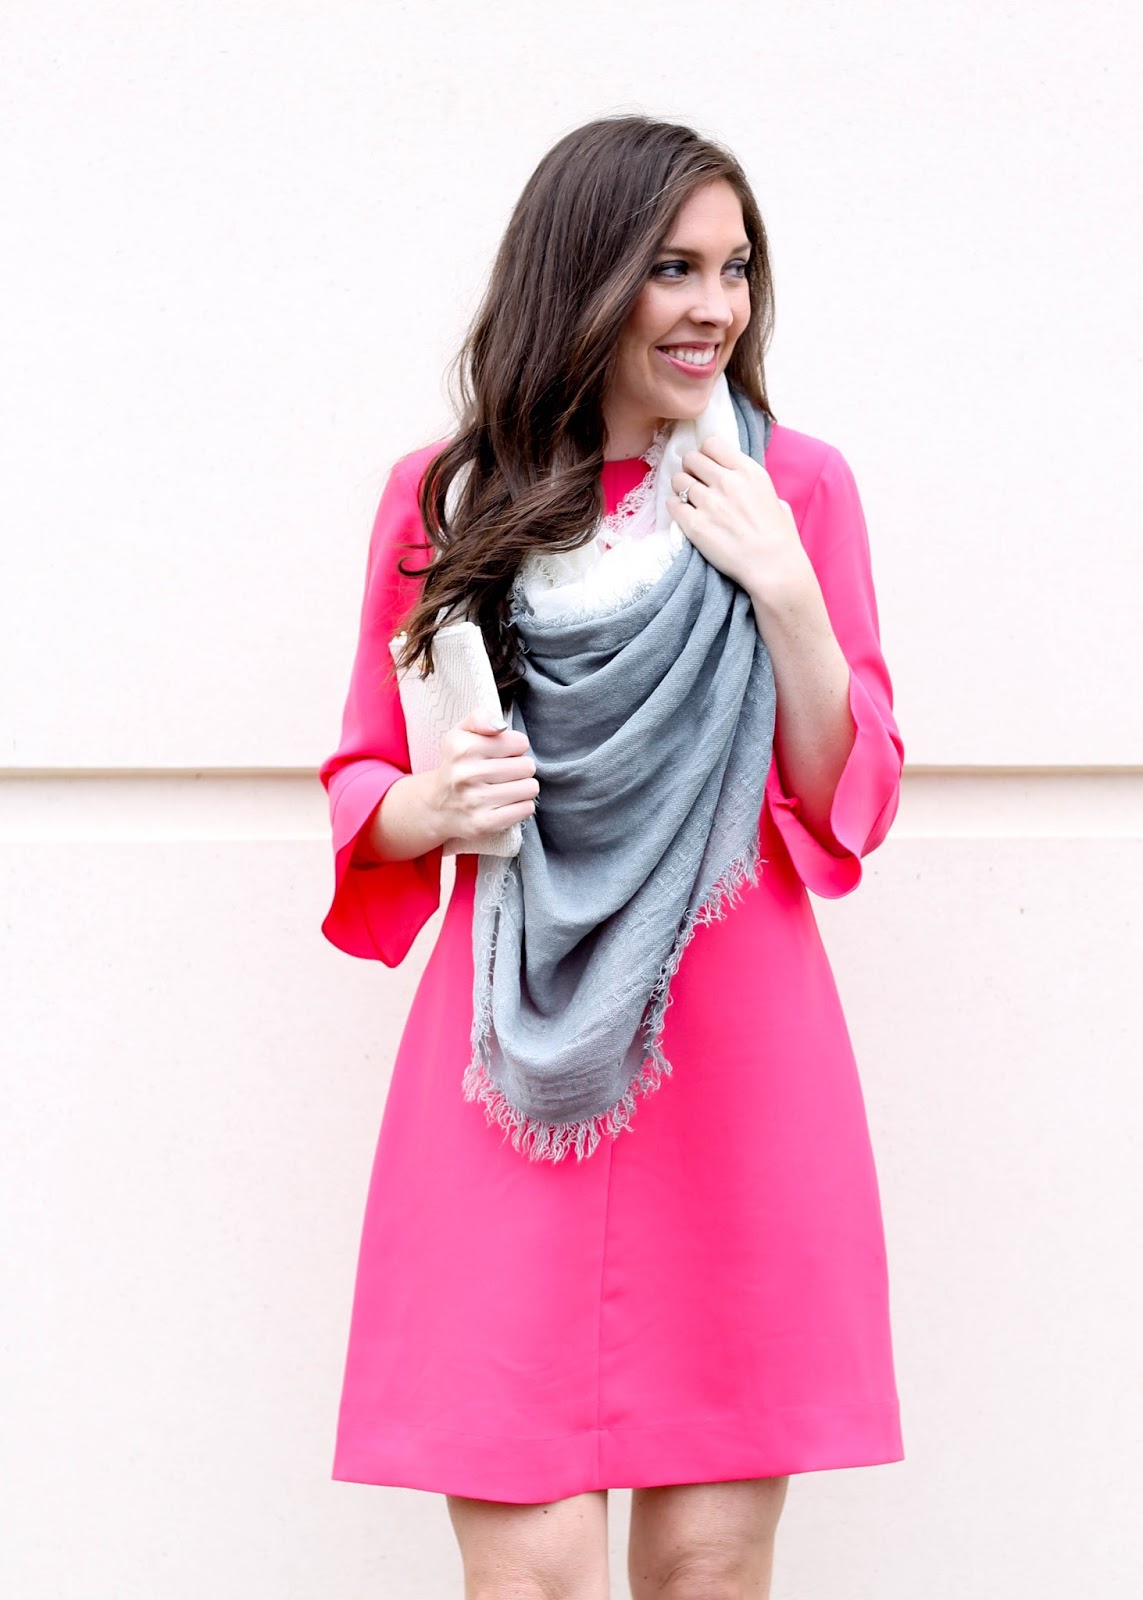 Spring Outfit Ideas, Spring Dress, Preppy Spring Dress with Ruffle Sleeves, Flutter Sleeve Dress, Banana Republic, GiGi New York All in One in white, Loft ombre scarf, fashion blogger, spring trends, pretty in the pines blog, shelby vanhoy